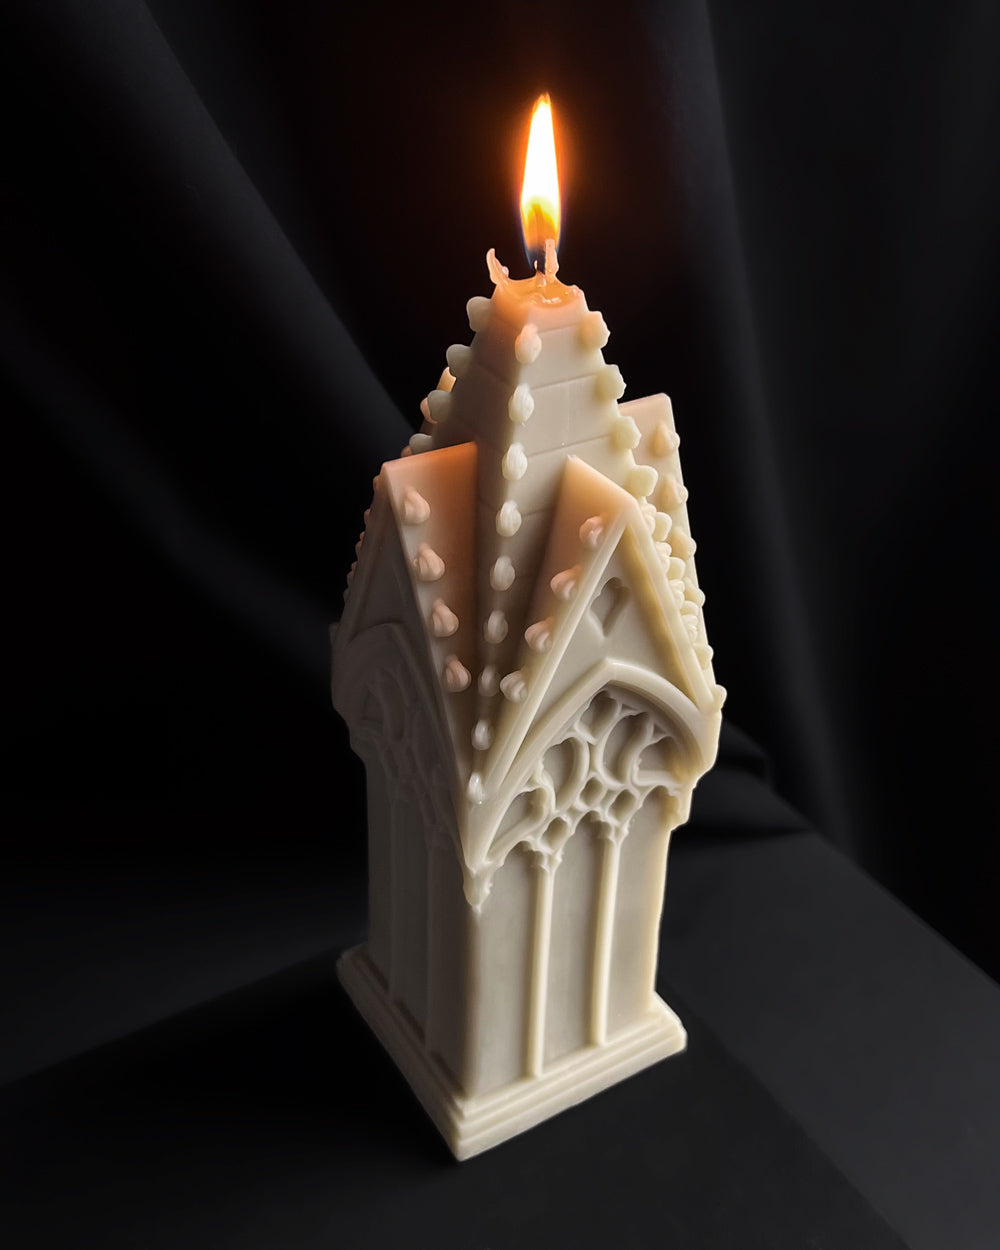 Gothic Scented Candles - Home Lights Candles